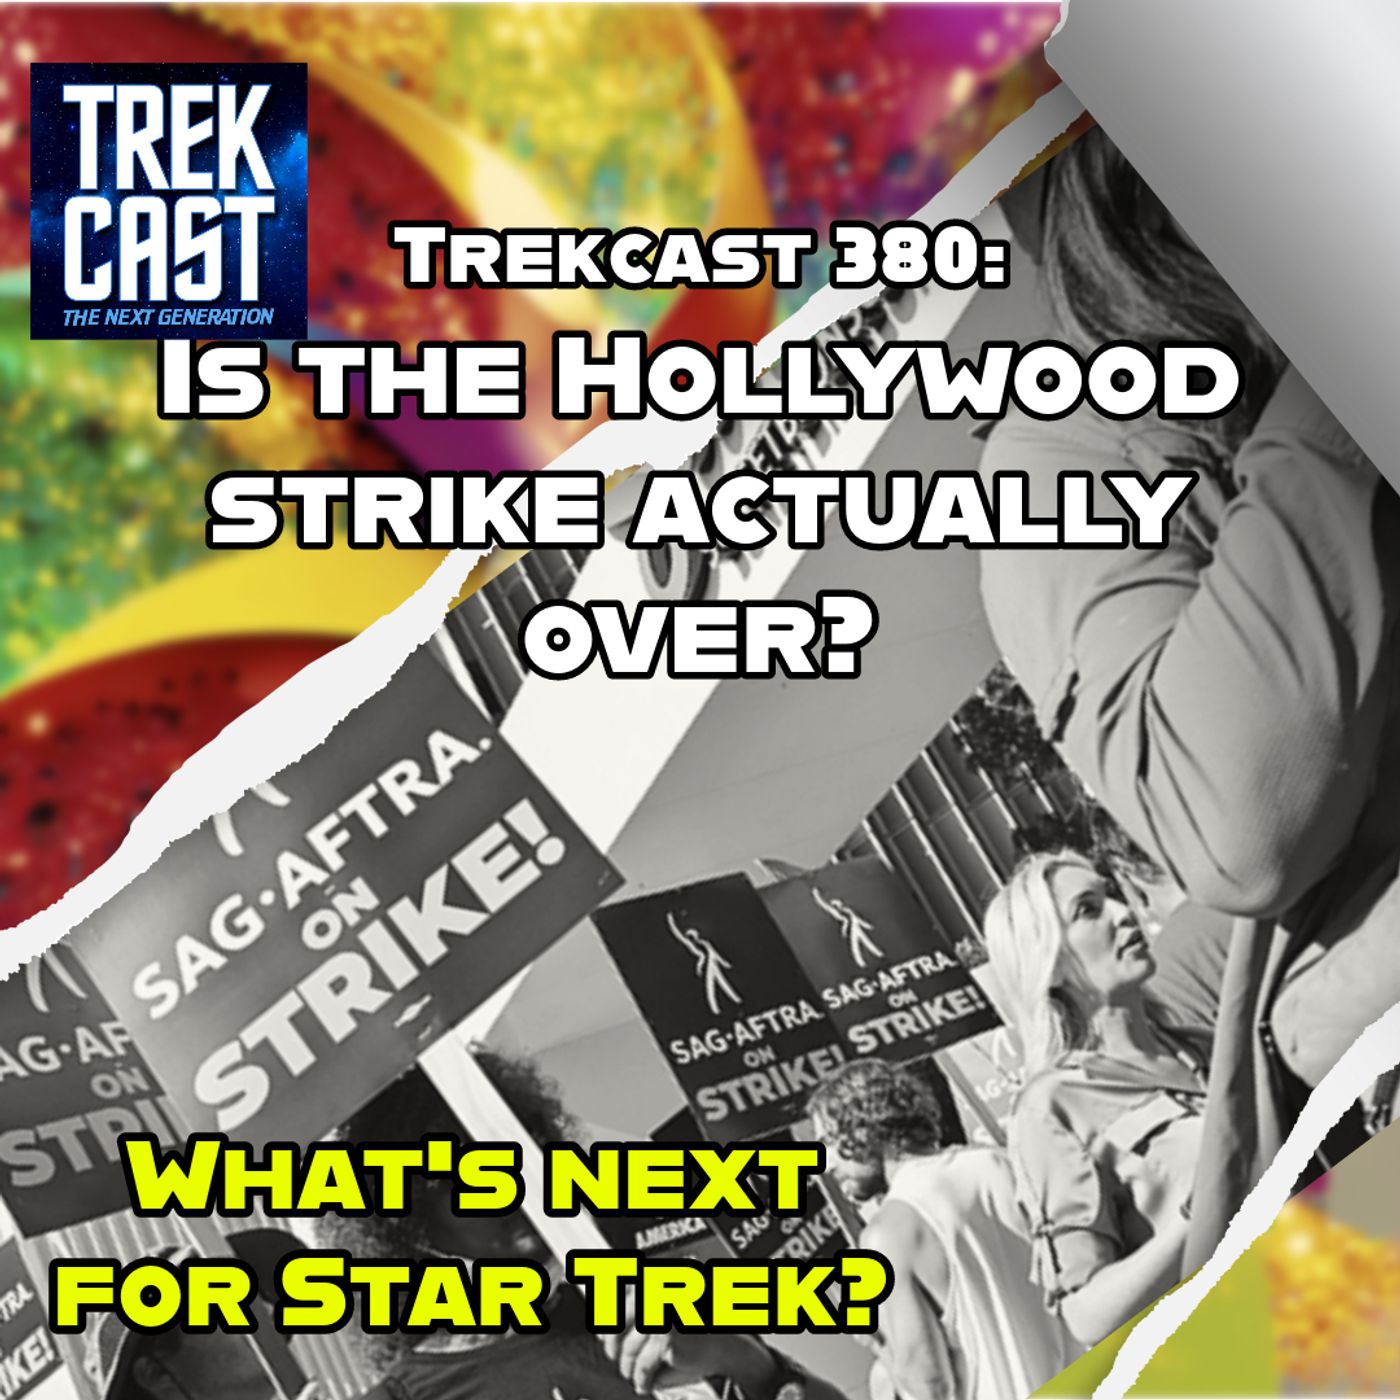 Trekcast 380: Is the Hollywood Strike Actually Over? What’s Next for Star Trek?